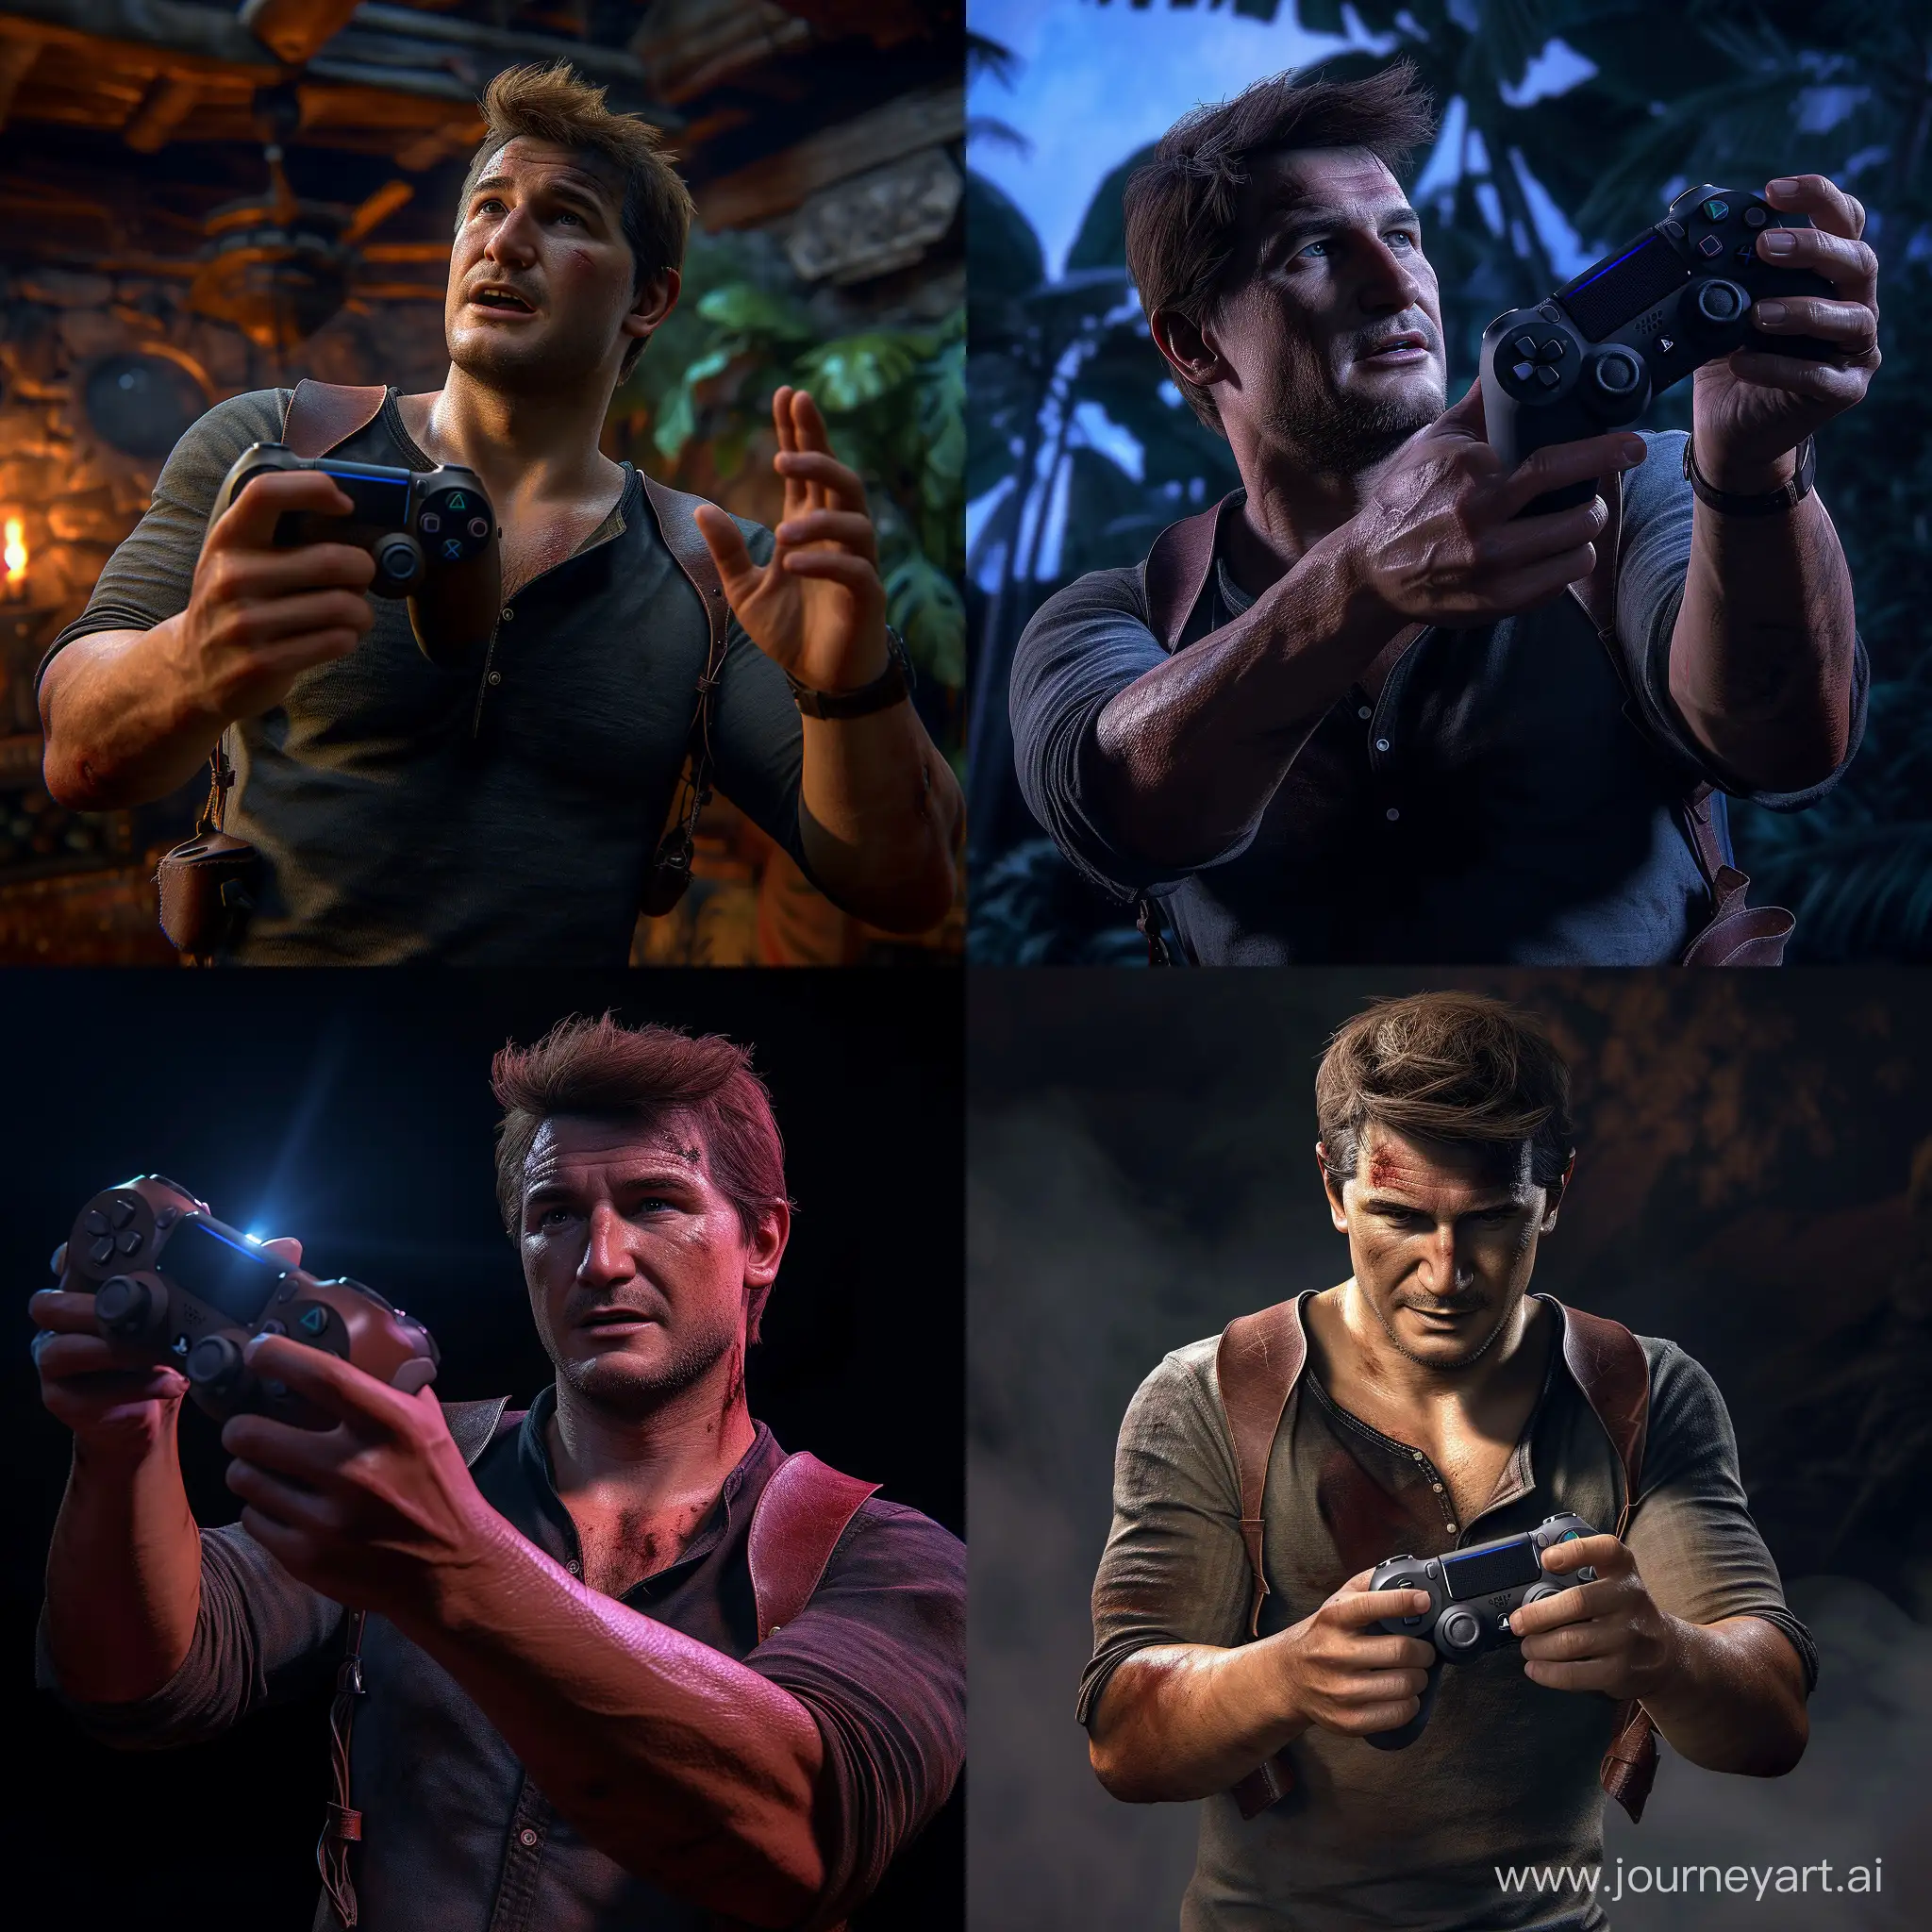 Nathan-Drake-Holding-PS5-Controller-in-Cinematic-Dramatic-Lighting